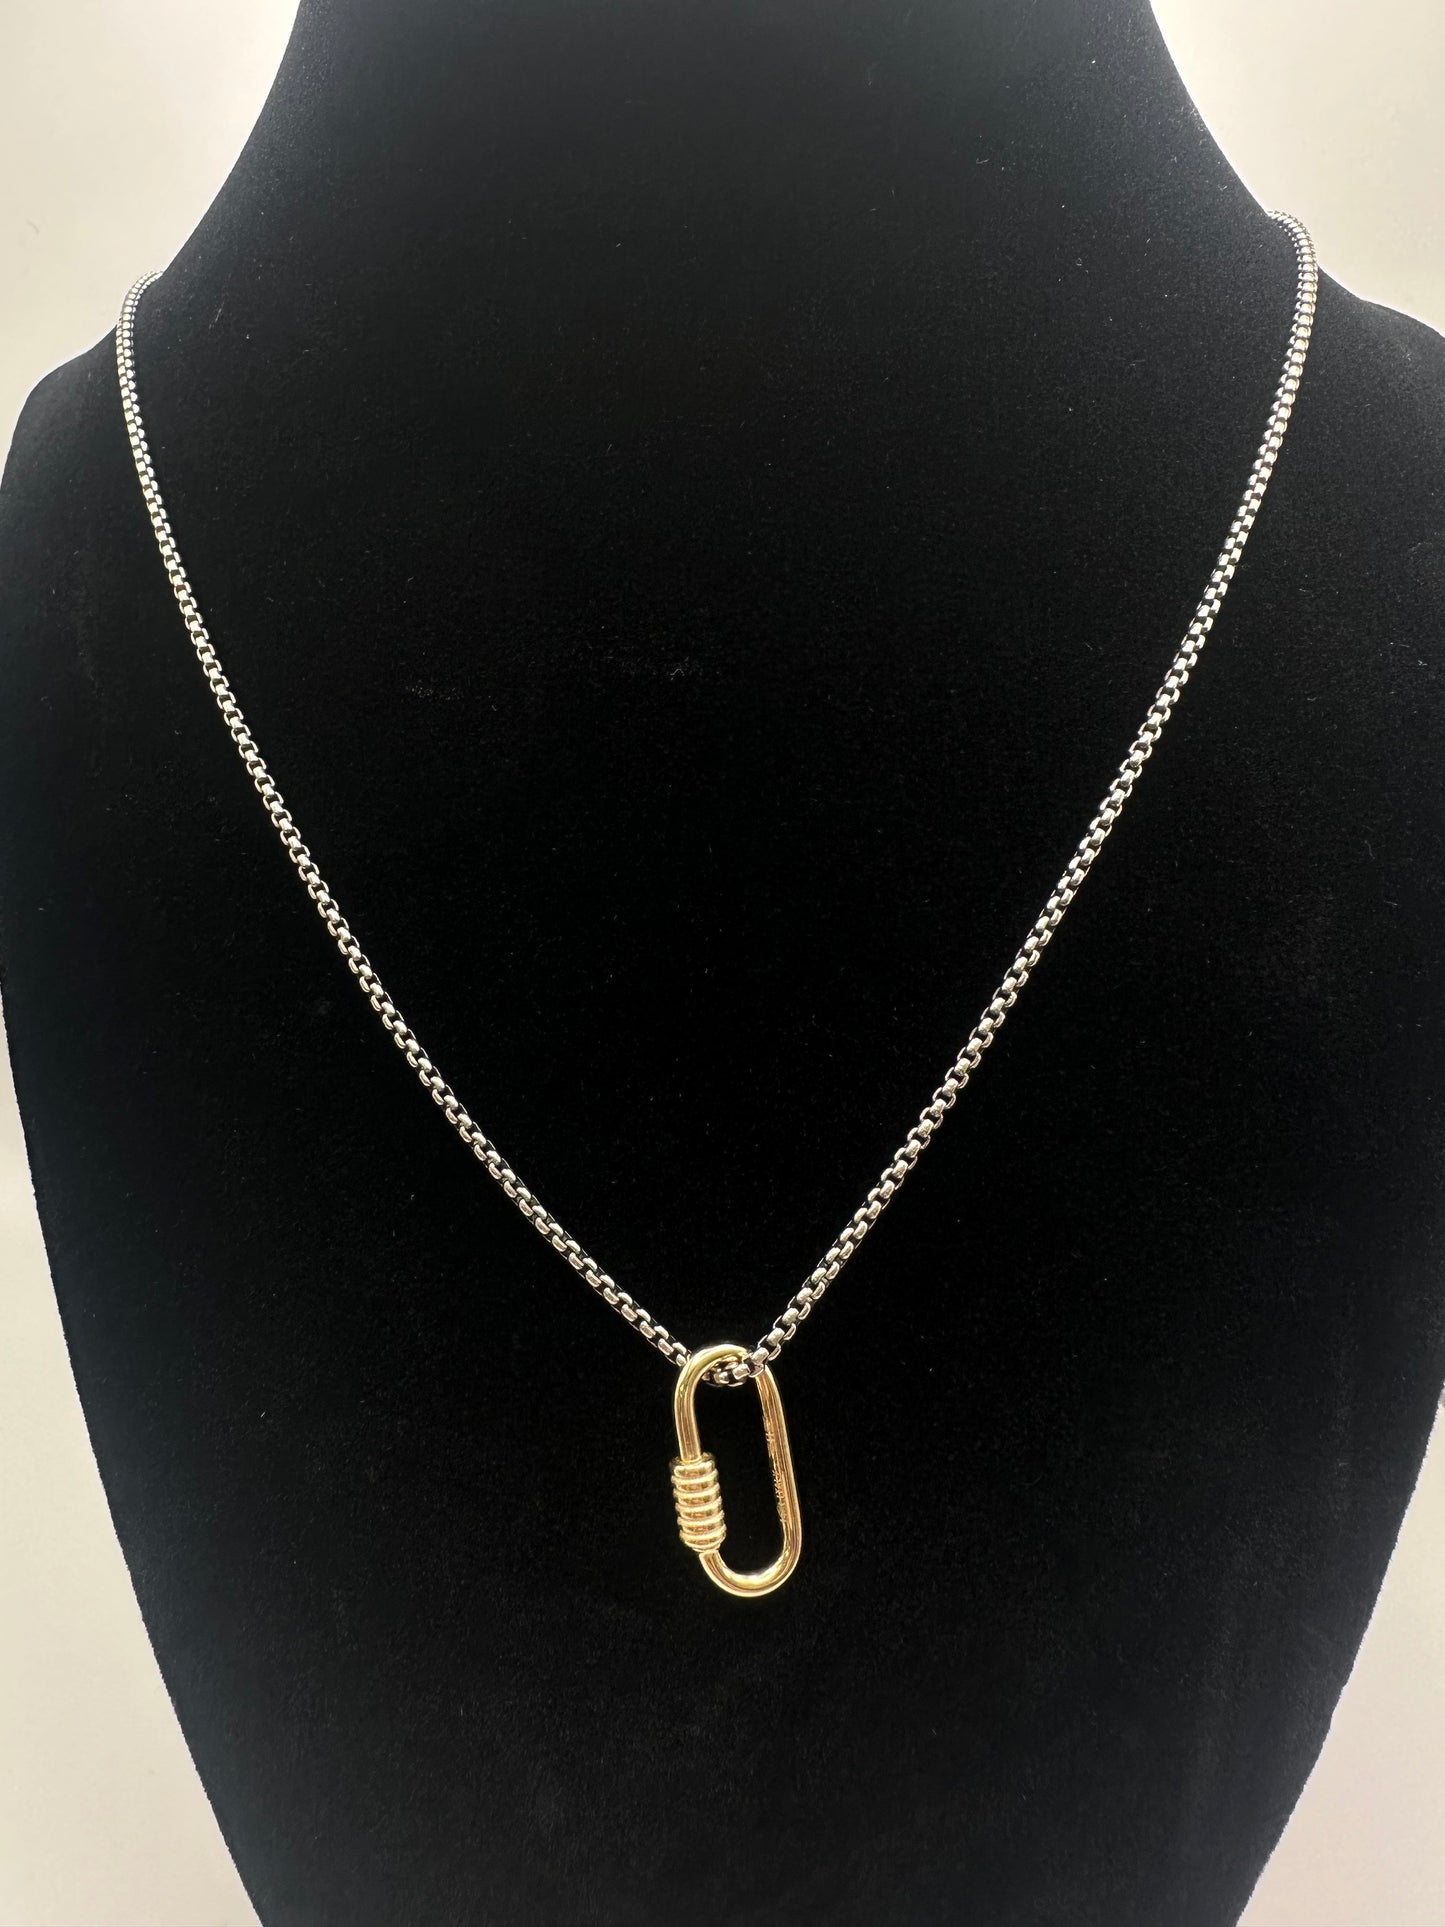 The 14k Solid Gold Lock Pendant